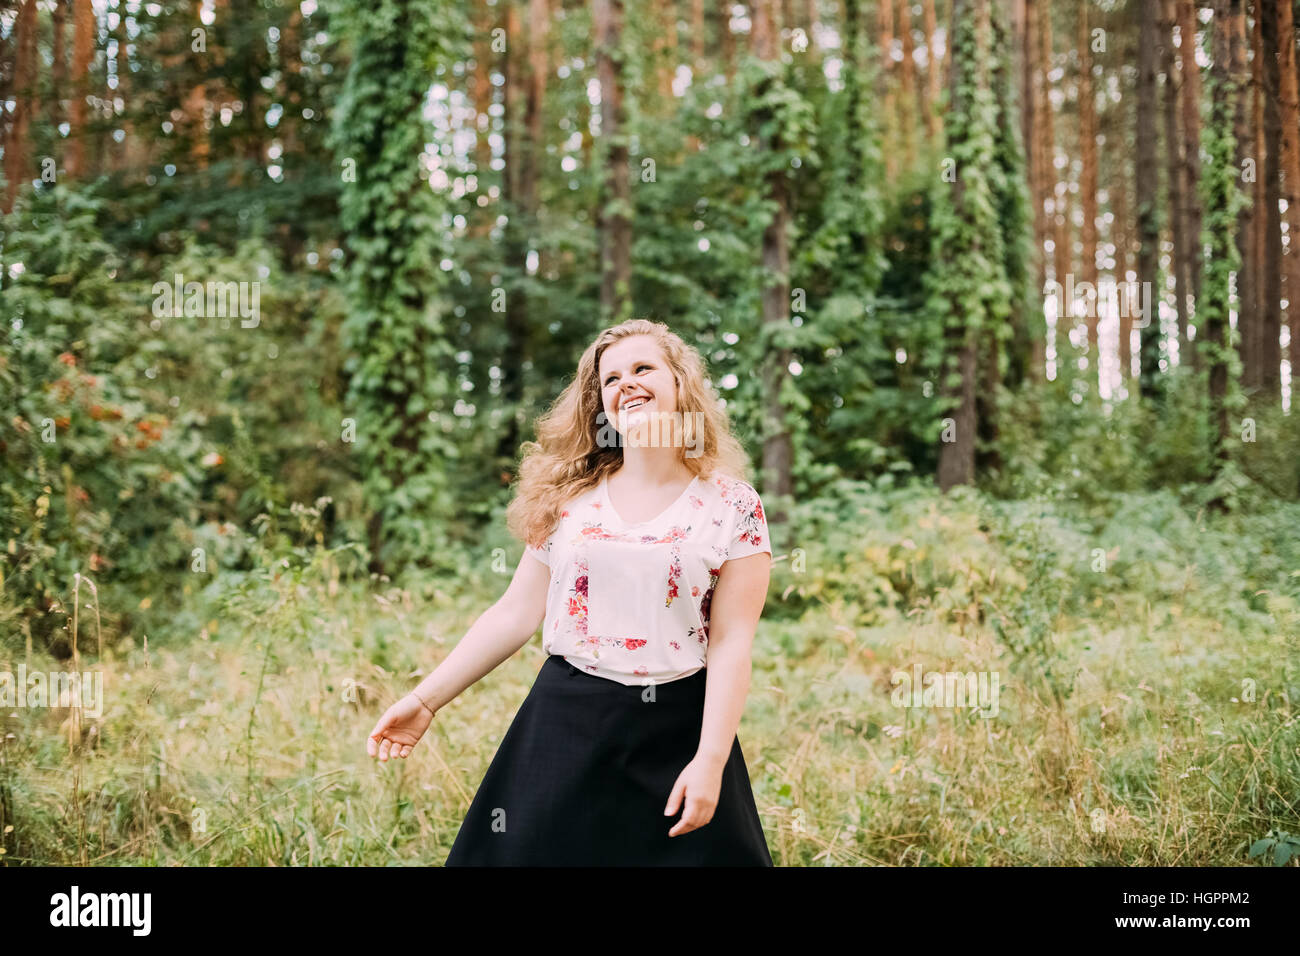 Young Pretty Plus Size Caucasian Happy Smiling Laughing Girl Woman With Wavy Brown Long Hair In White T-Shirt, Waltz Round In Summer Green Forest. Stock Photo